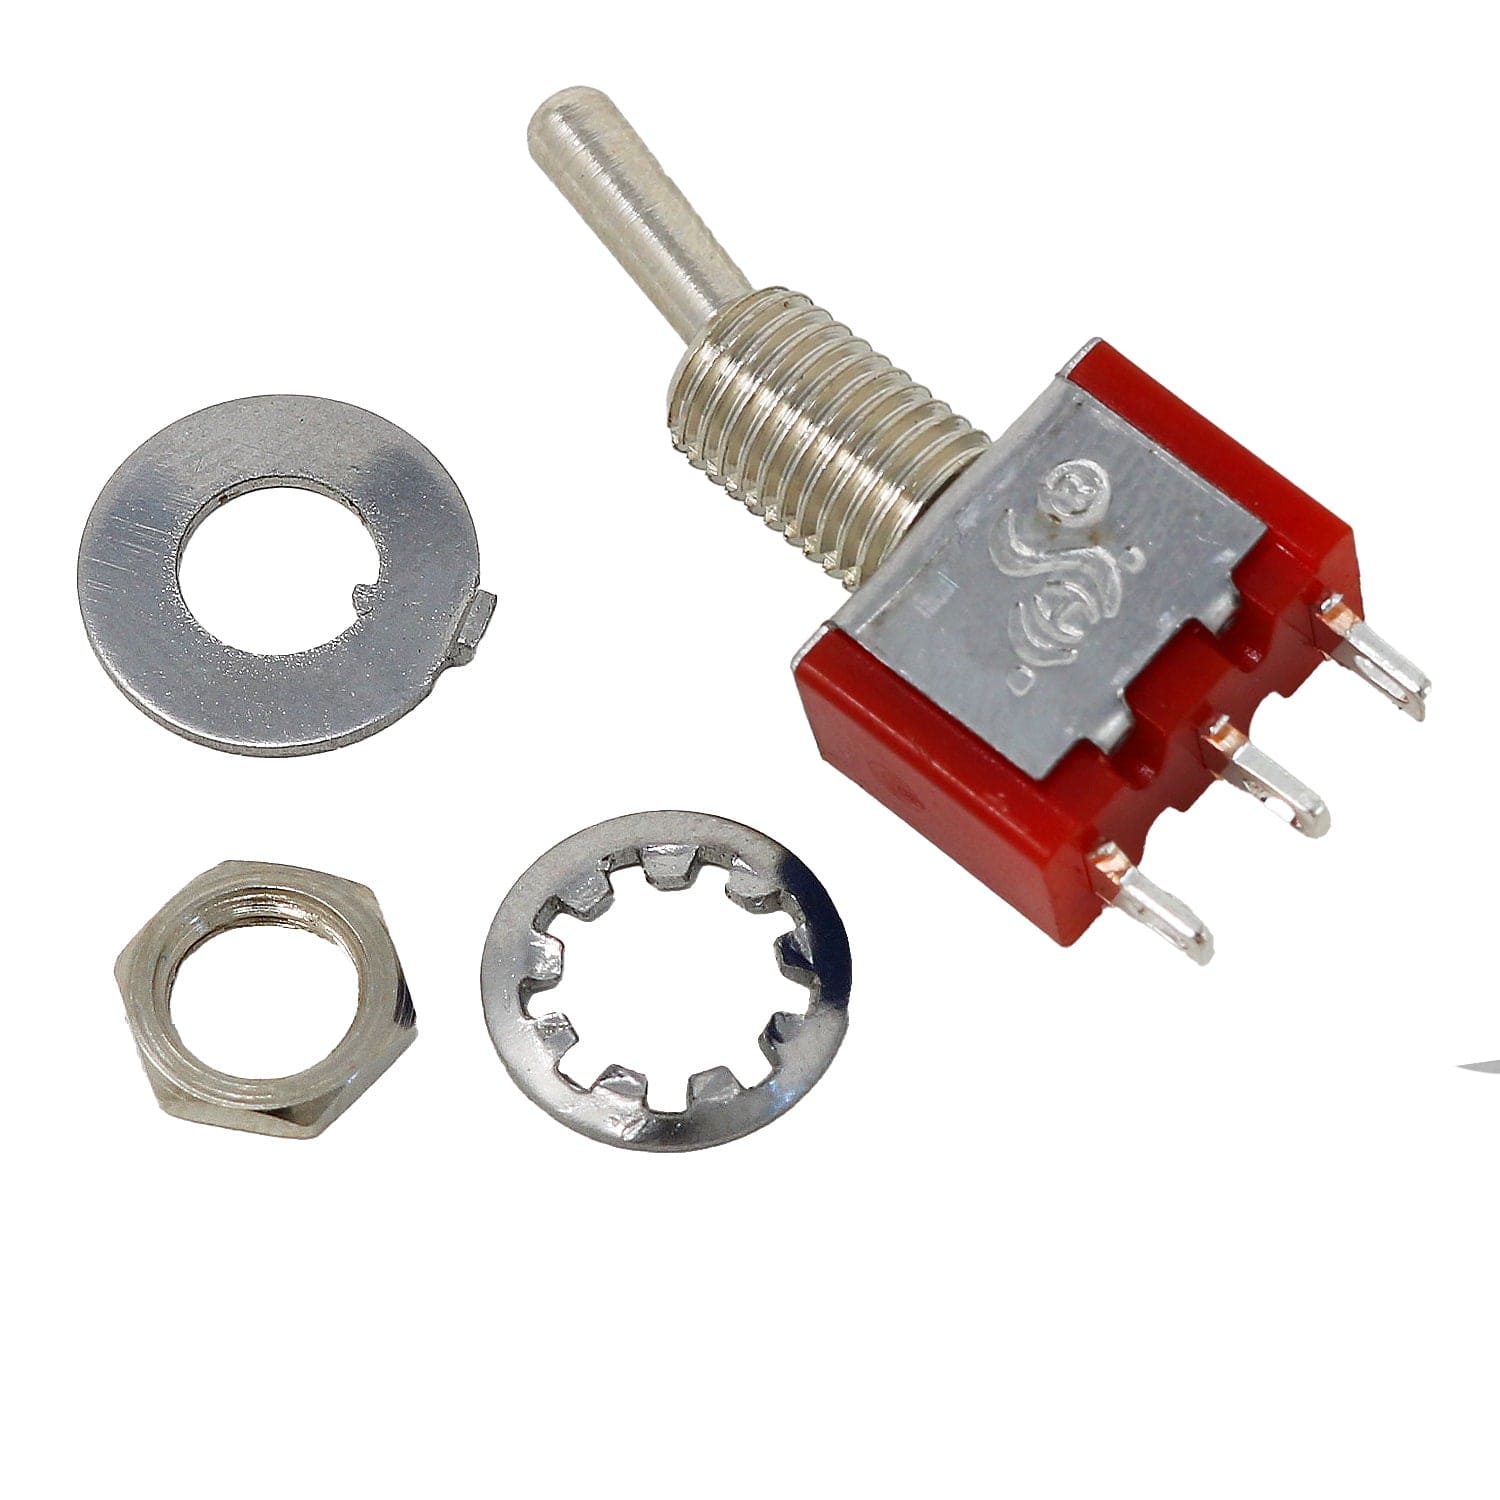 SPDT ON-OFF-ON Latching Miniature Toggle Switch - The Pi Hut